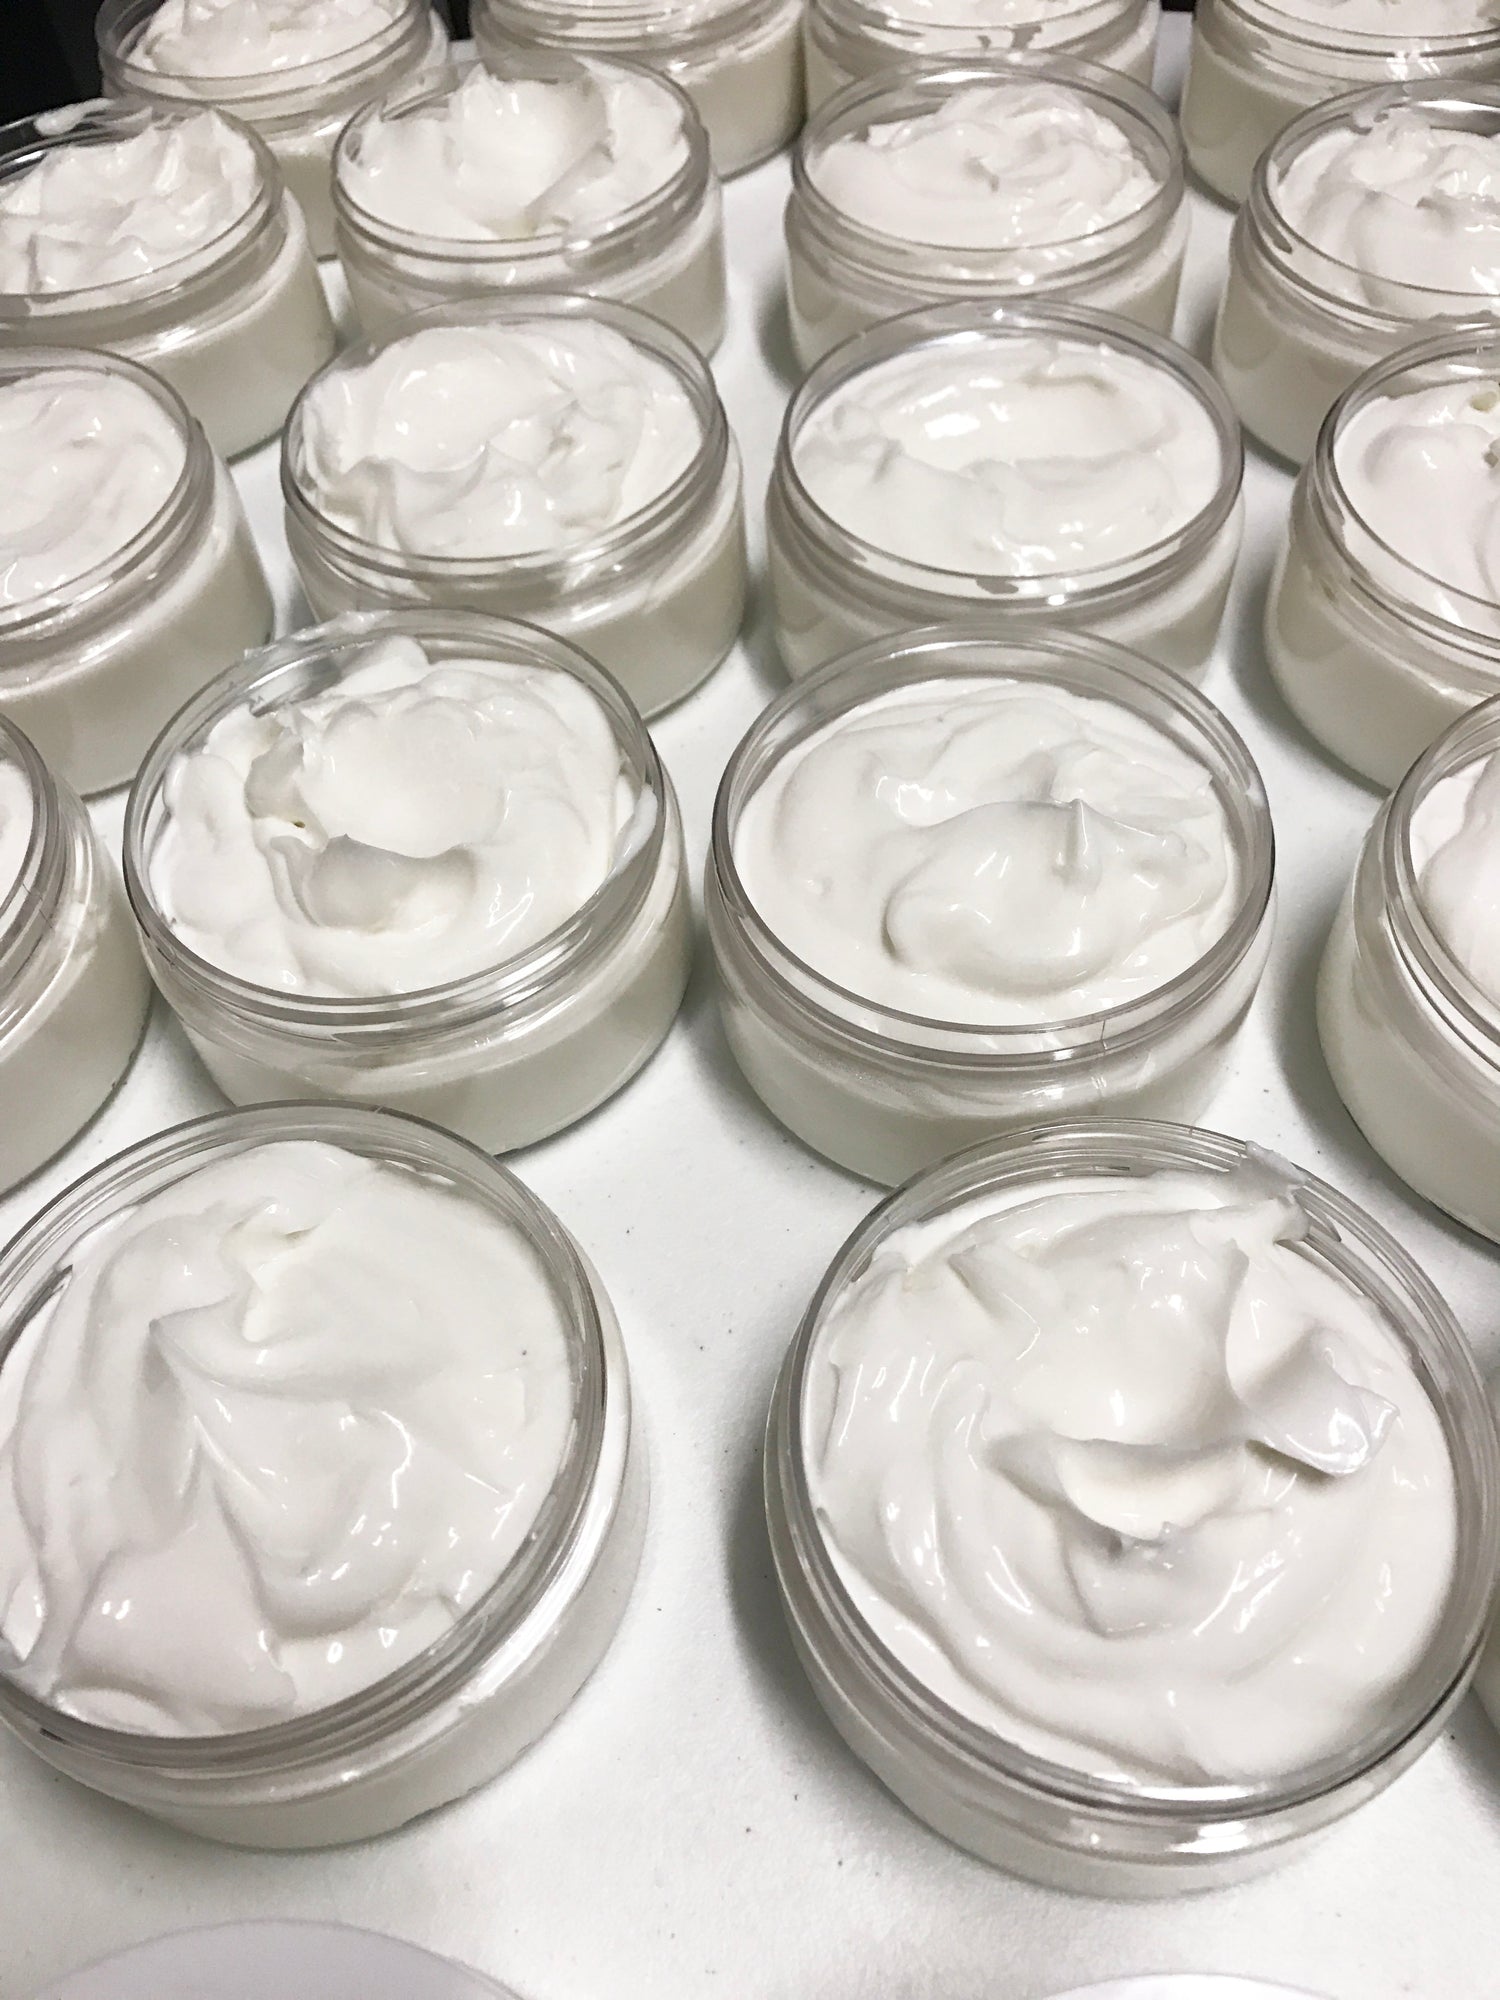 Handmade Skin Care Products